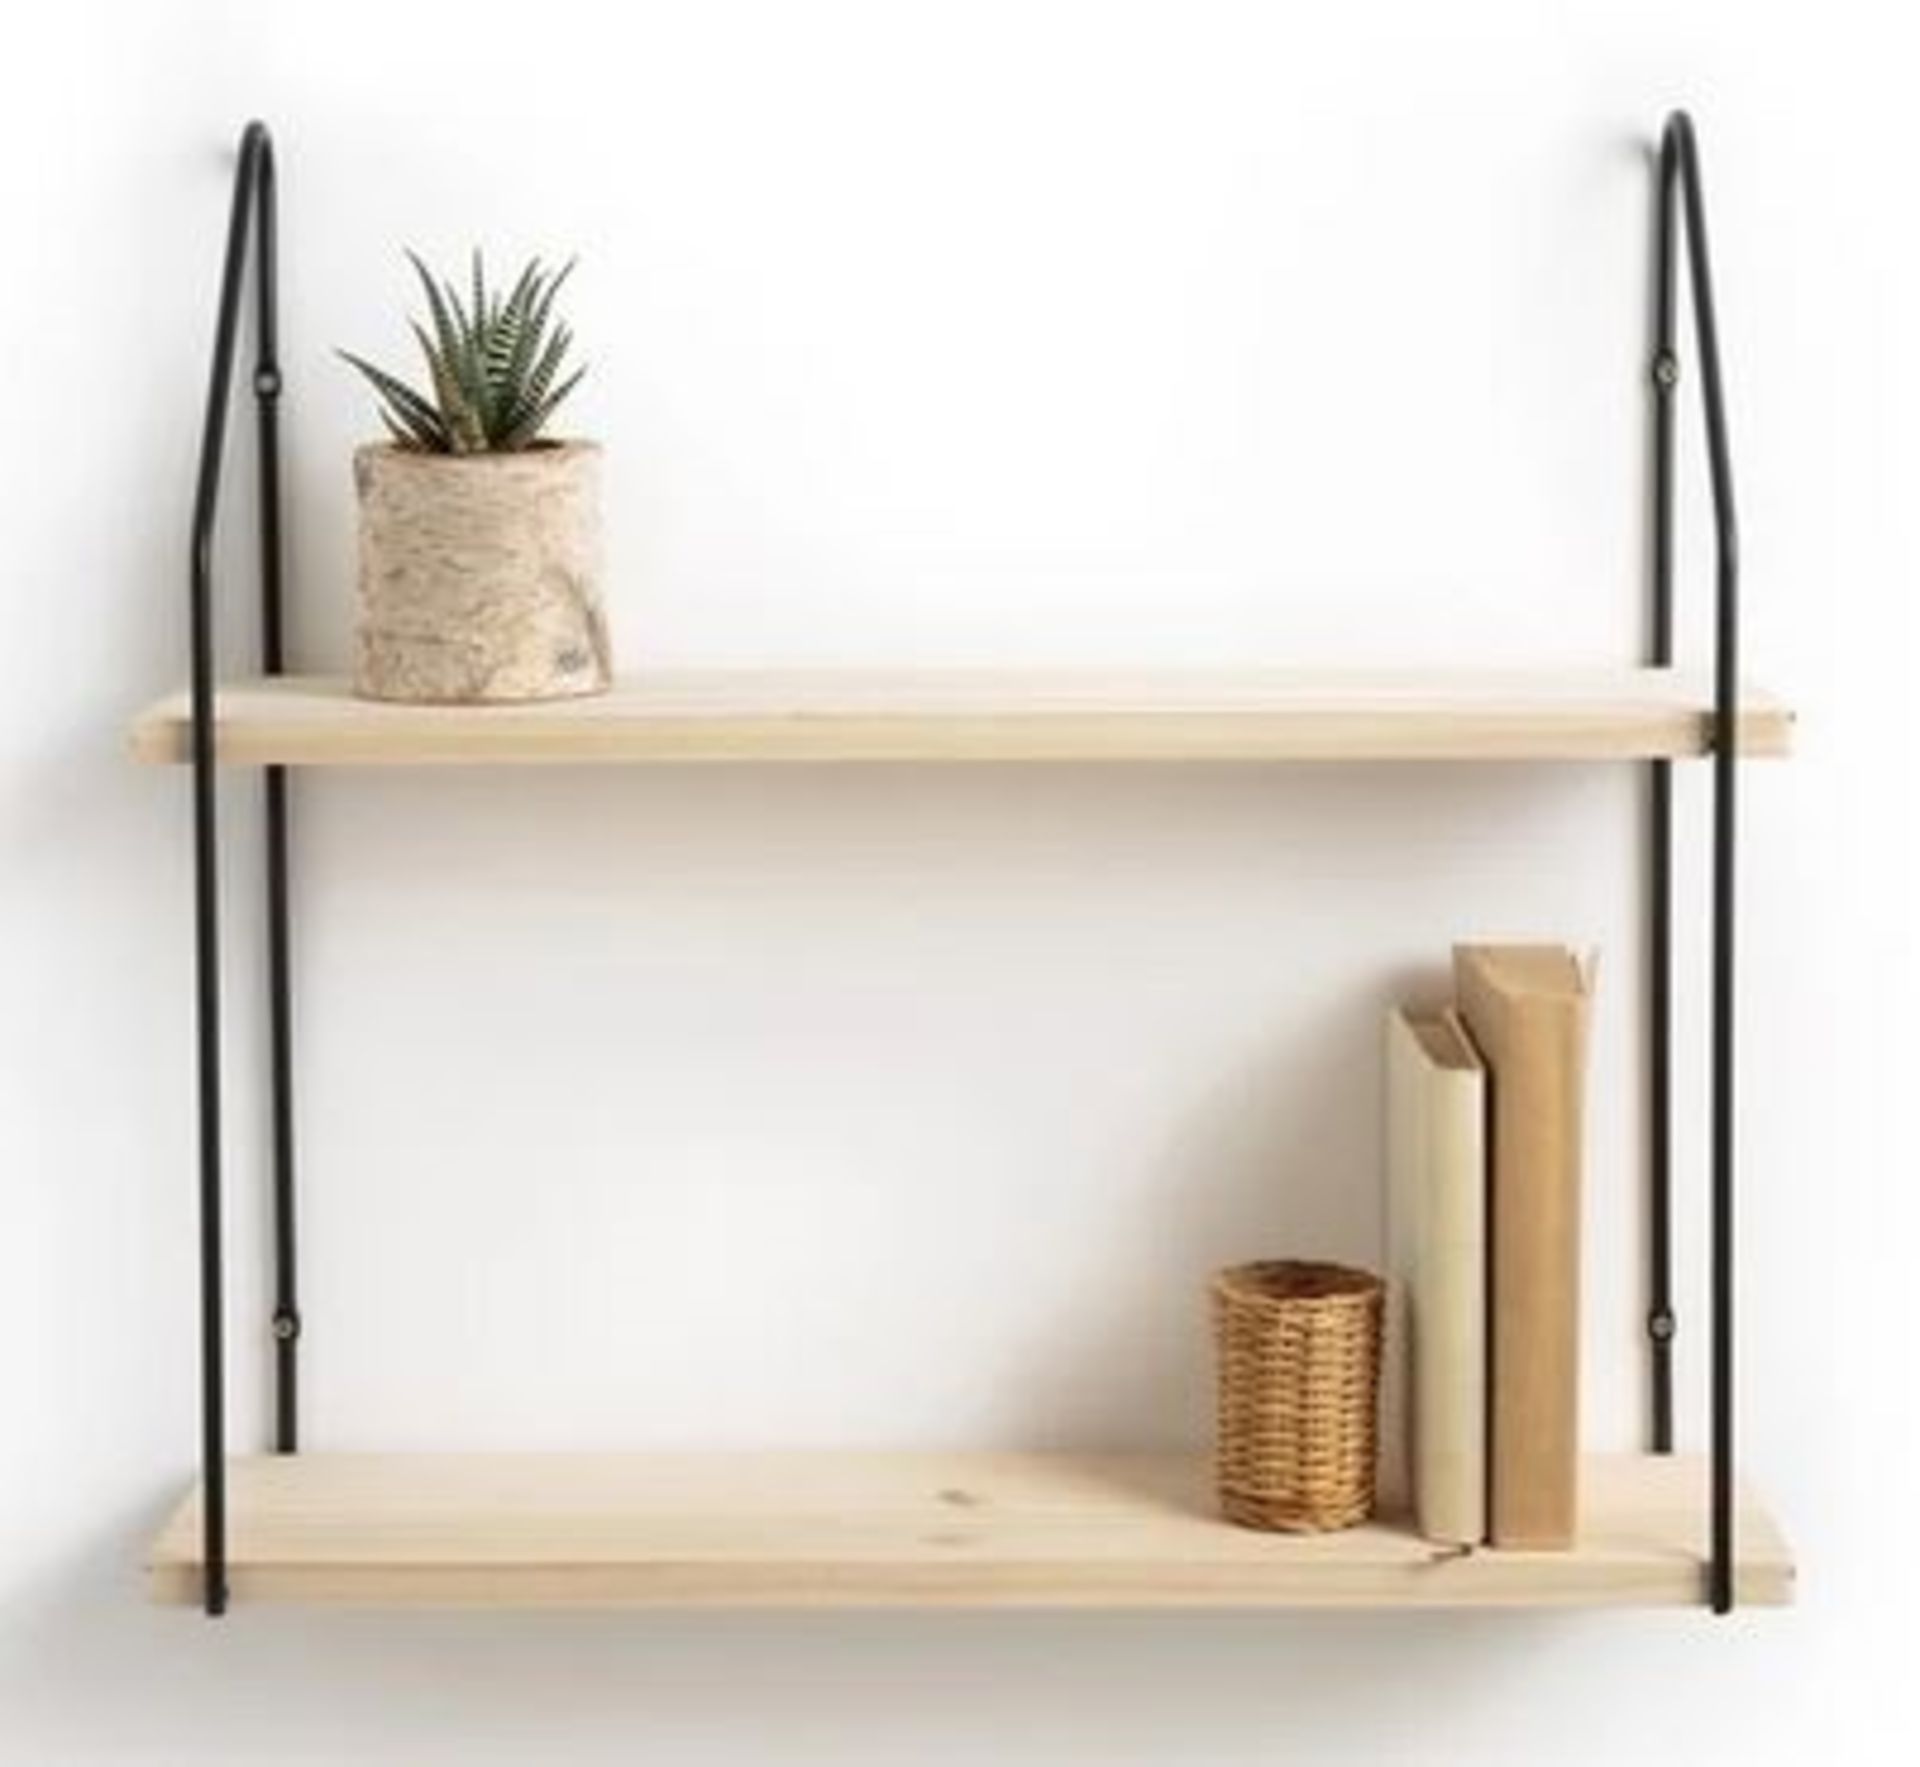 1 X LA REDOUTE VINTO DOUBLE PINE AND METAL WALL SHELVES IN BLACK AND NATURAL 65CM X 59CM / RRP £46.